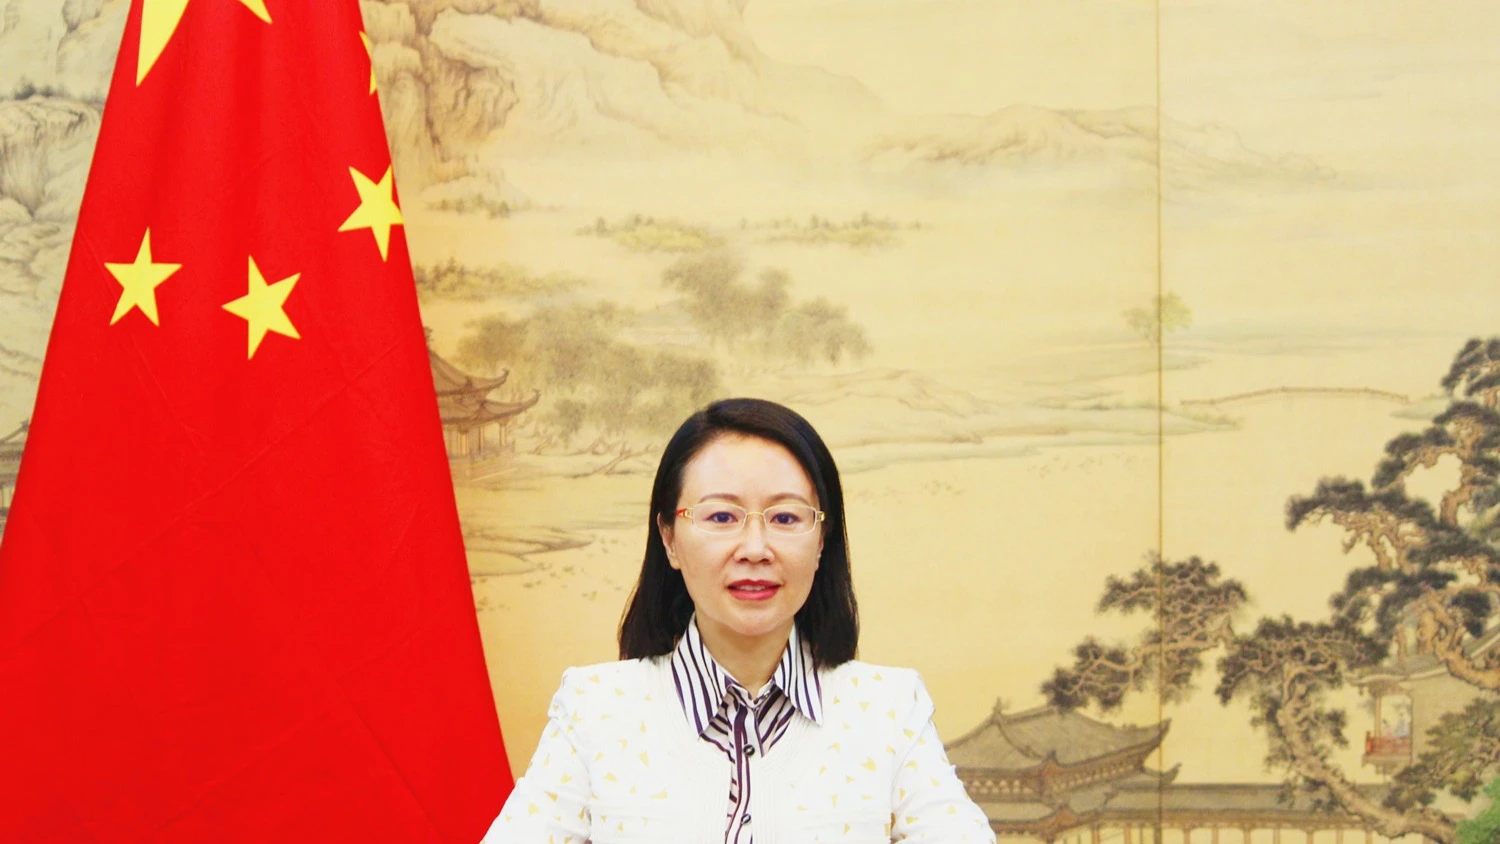 Chen Mingjian (pictured) is the Chinese Ambassador to Tanzania.